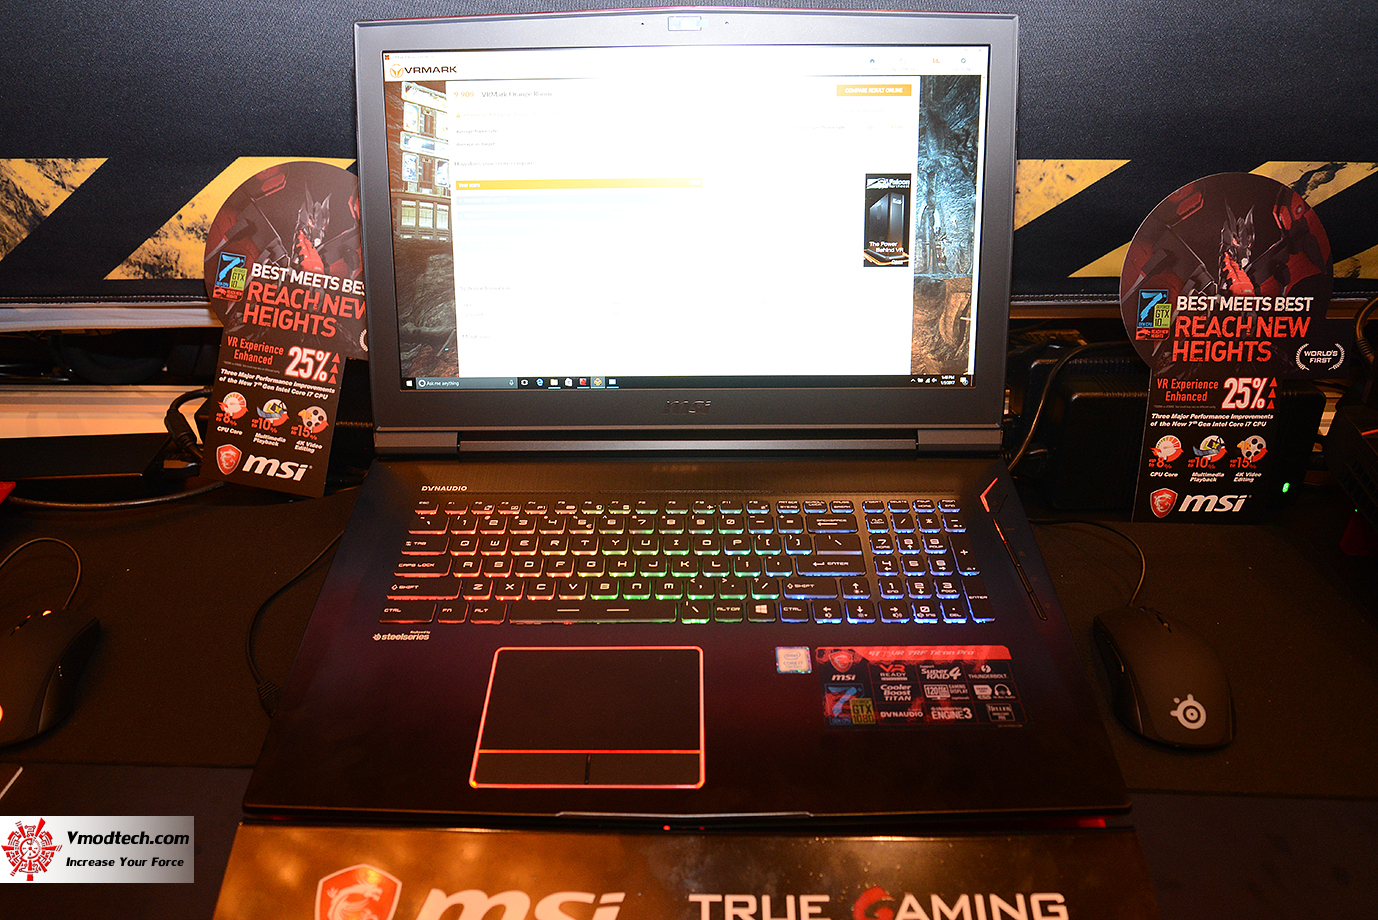 dsc 1513 MSI GAMING NOTEBOOK CES2017 LAS VEGAS PREVIEW